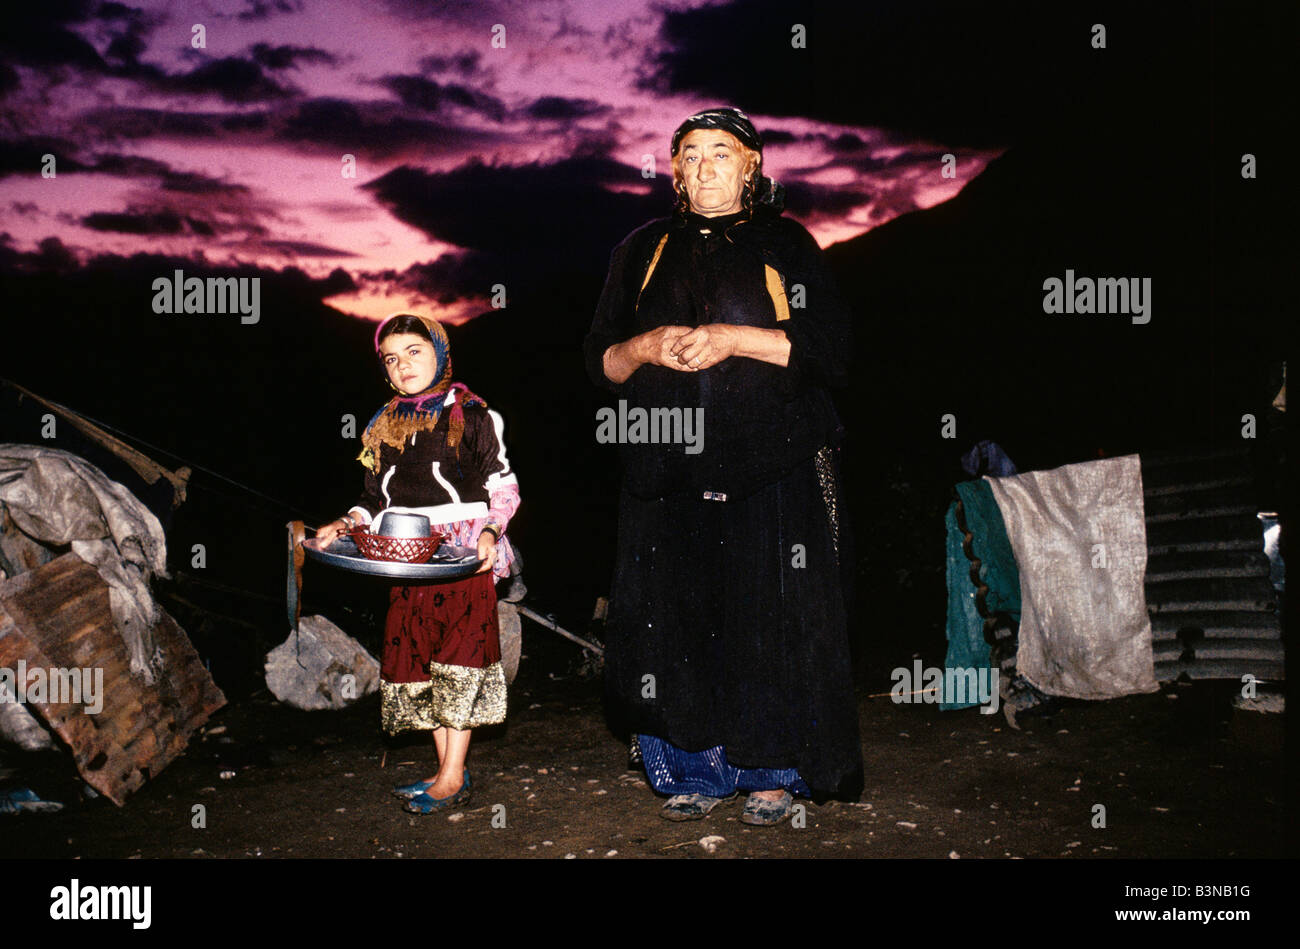 KURDISTAN', WOMAN & CHILD STANDING AGAINST A PURPLE & RED SUNSET IN CHOWMAN, OCTOBER 1991 Stock Photo